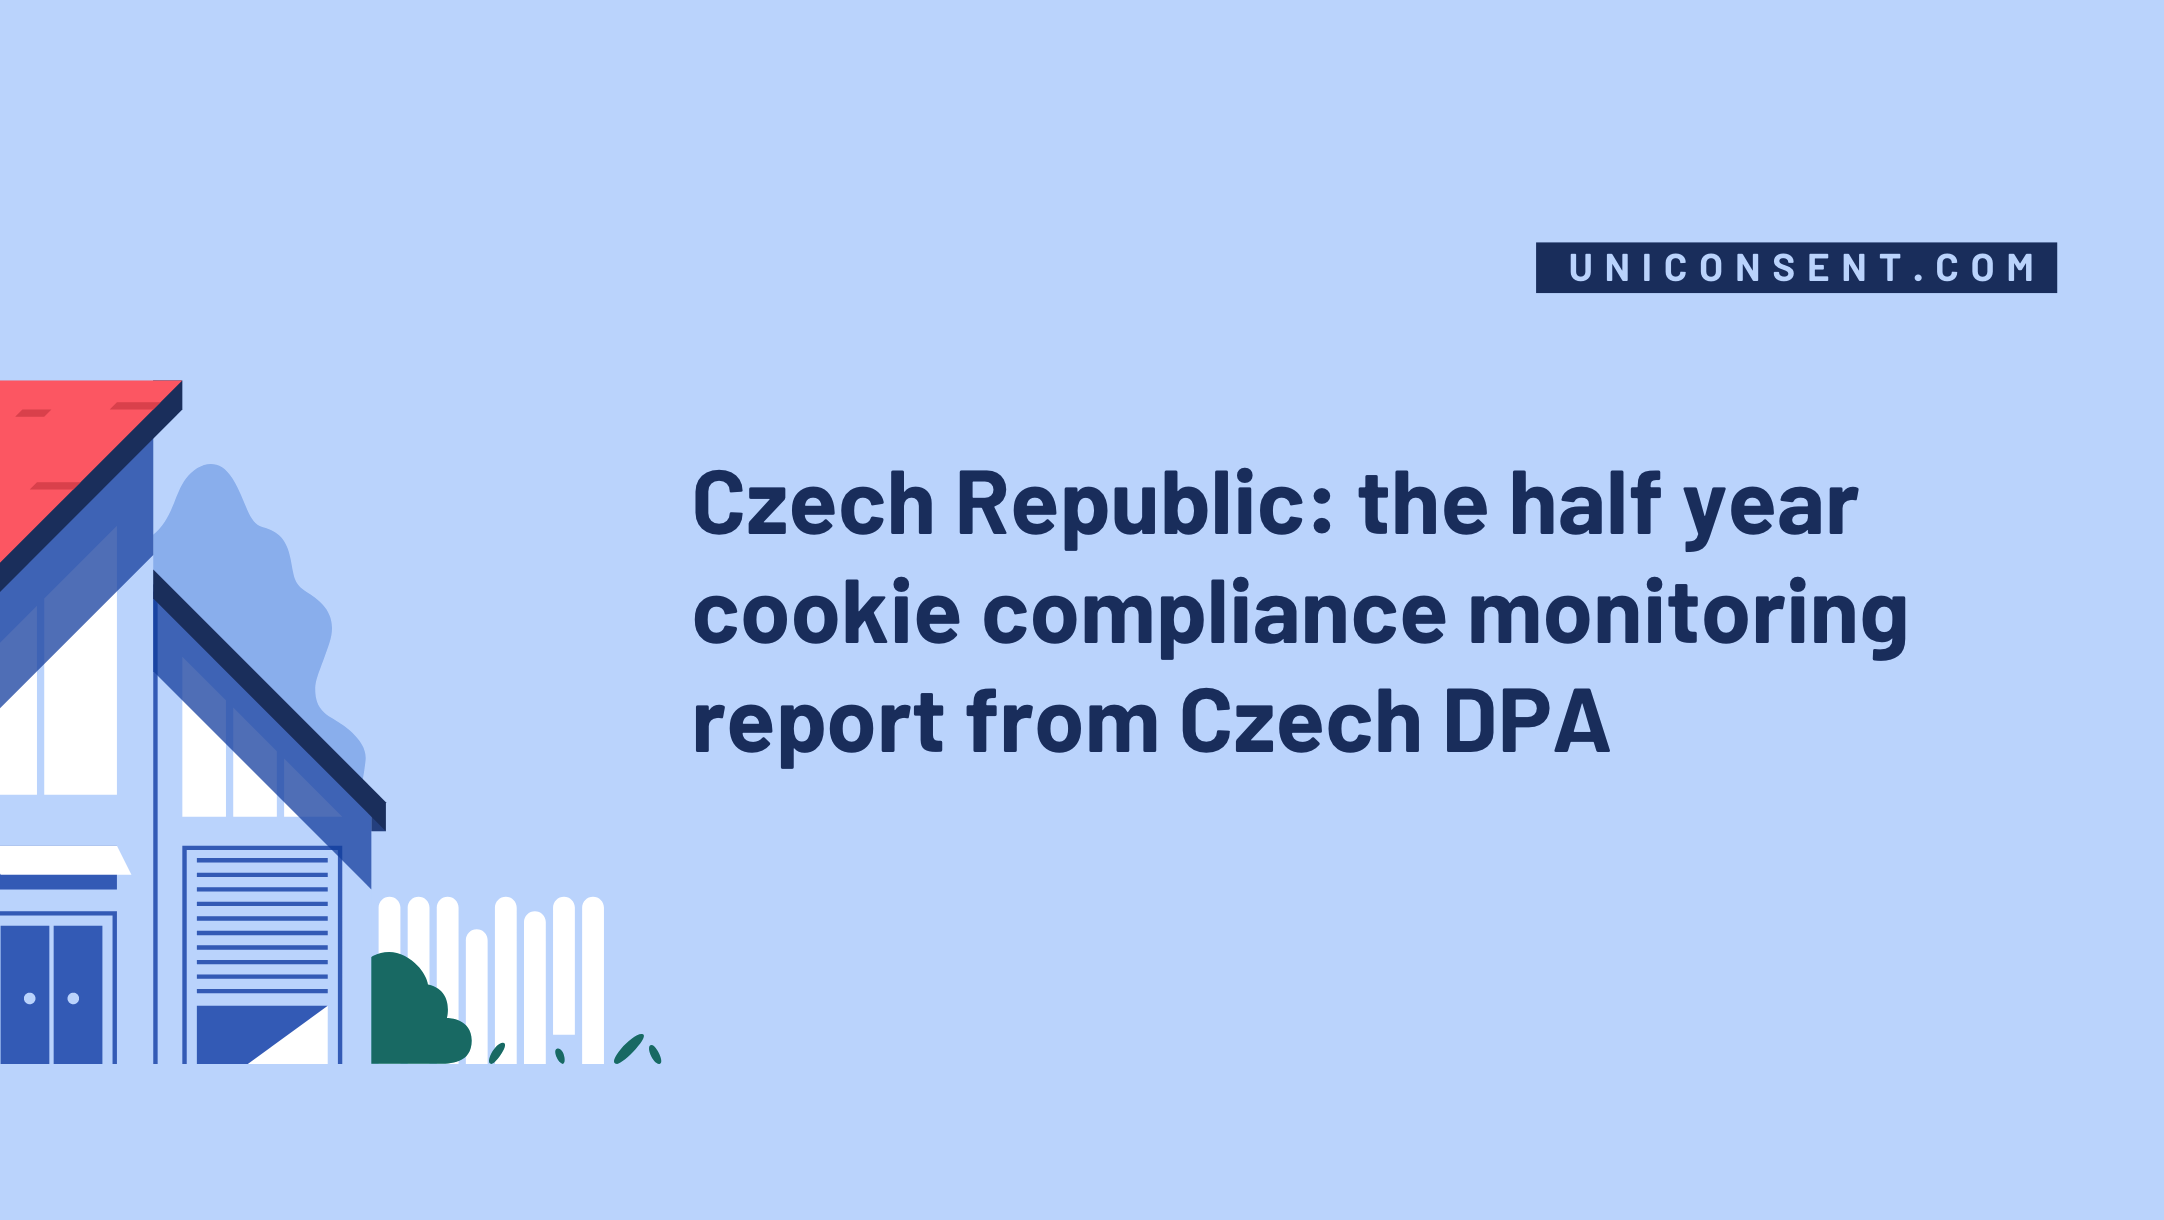 Czech Republic: the half year cookie compliance monitoring report from Czech DPA